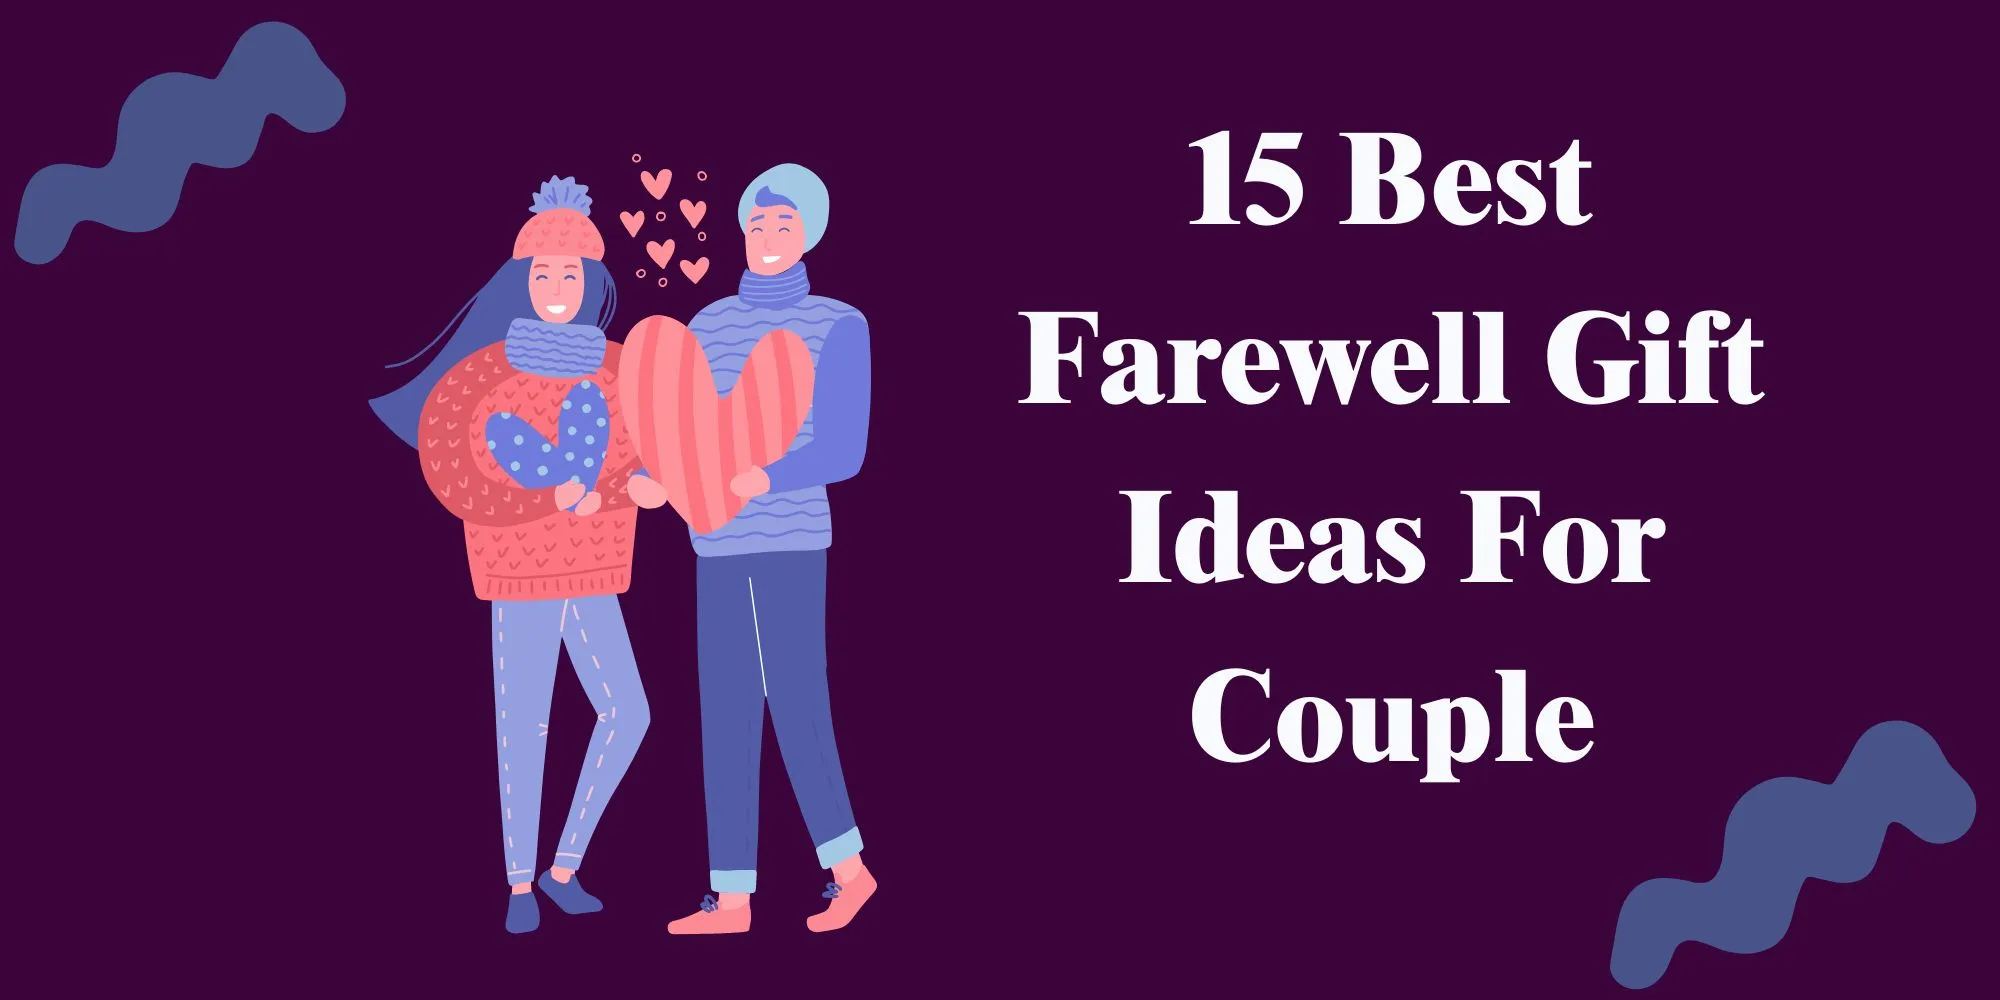 15-Best-Farewell-Gift-Ideas-For-Couple